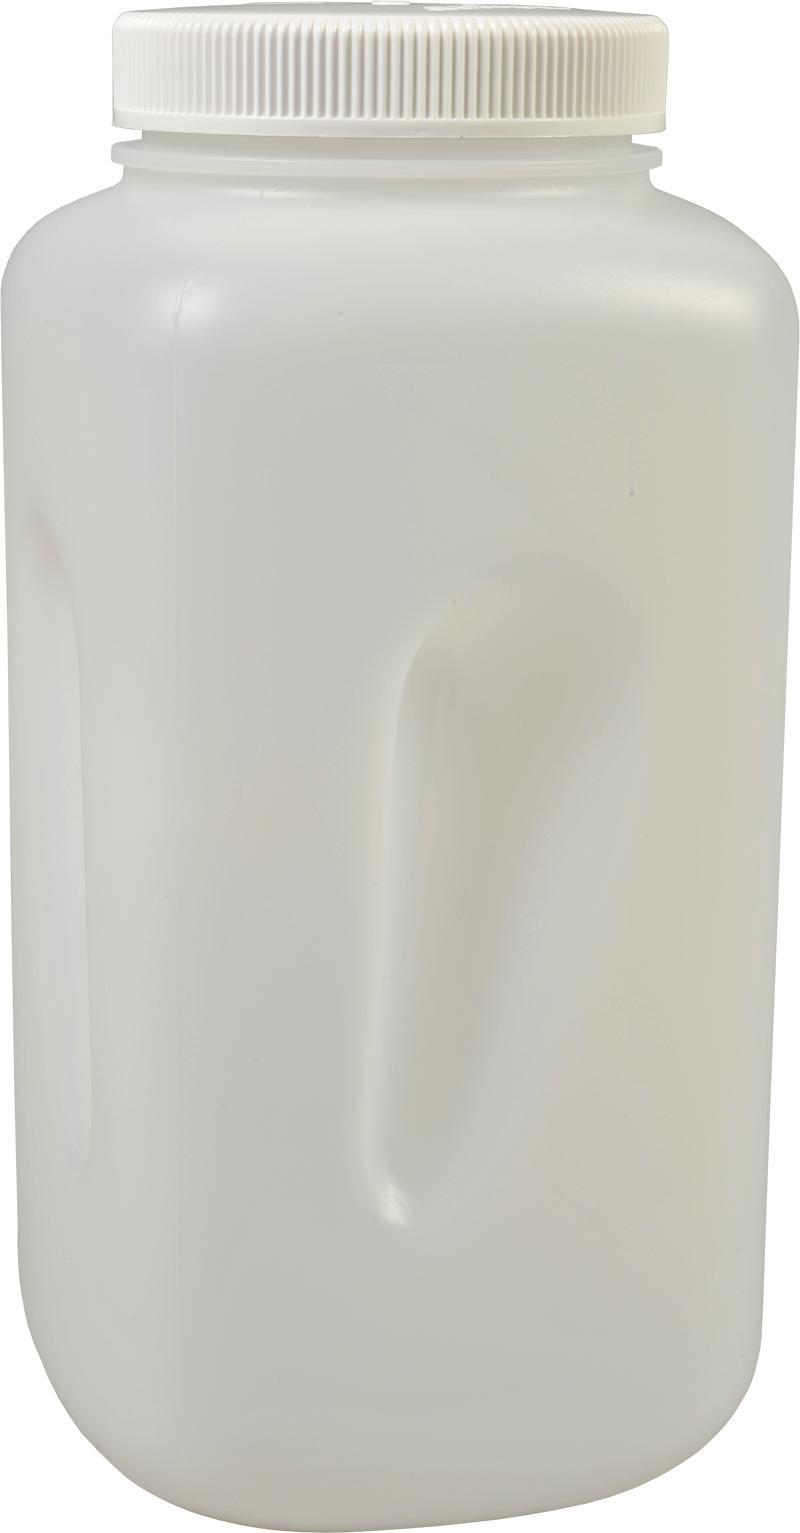 Plastic Bottle 76768-00 The Plastic Bottle is an easy-grip translucent high-density polyethylene bottle with a capacity of 4 liters (1 gal), supplied by